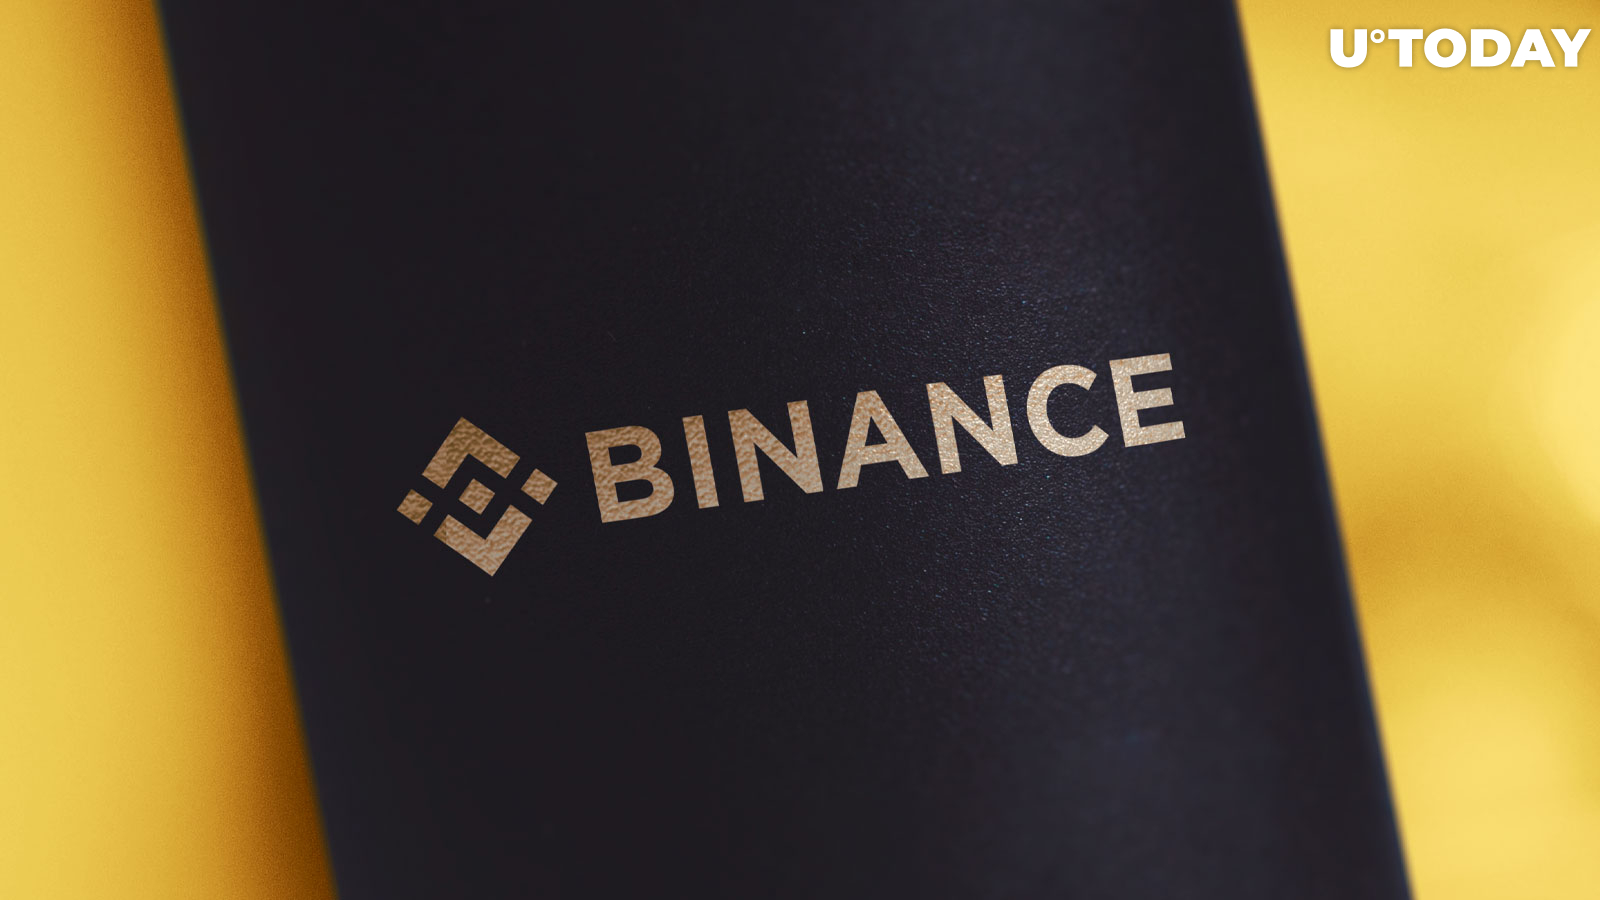 Former SEC Official Says Binance's Finances Are Even More Opaque Than Those of FTX